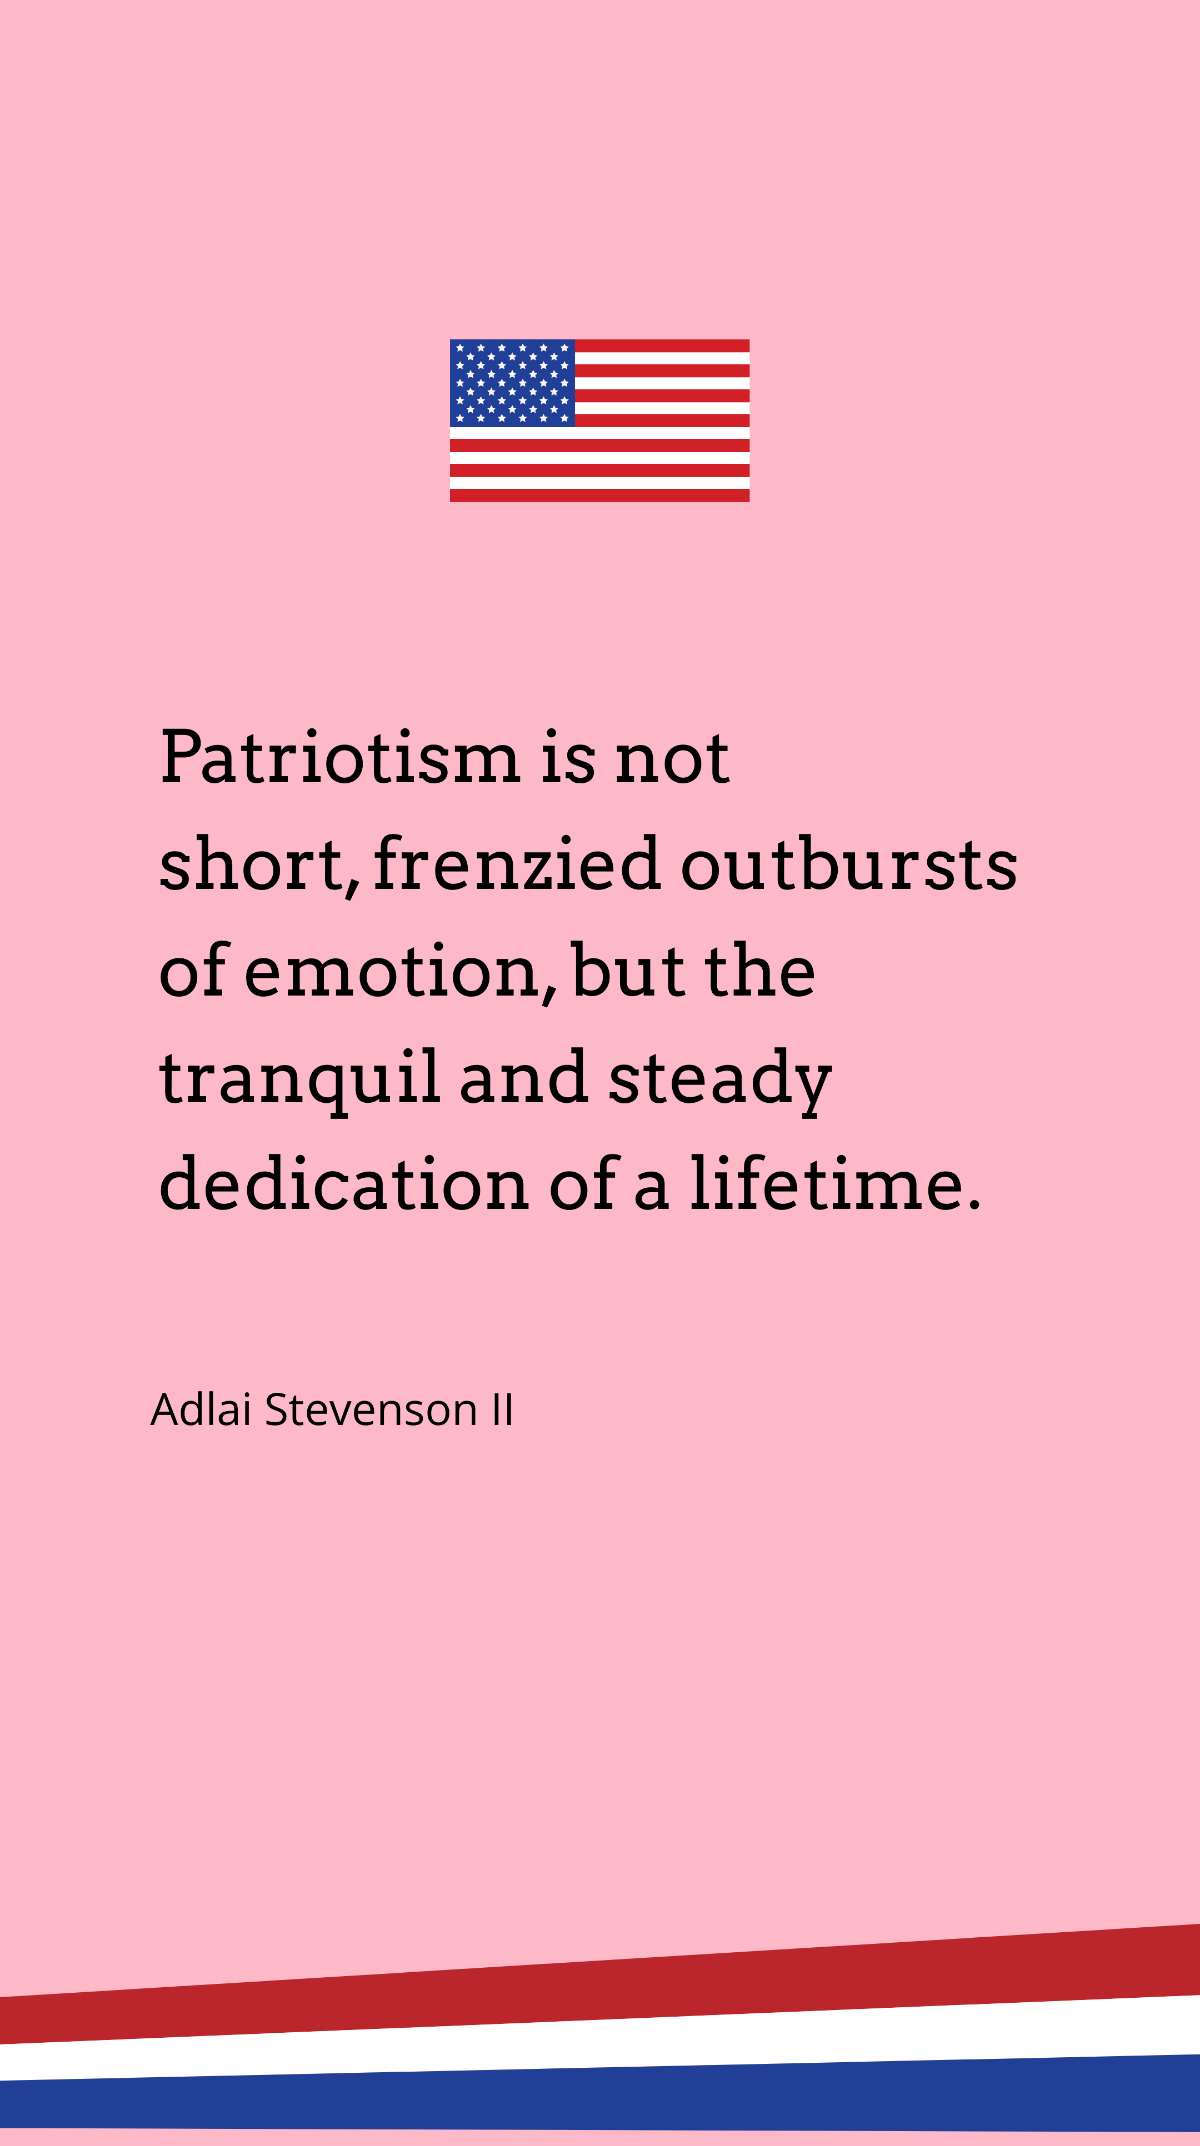 Adlai Stevenson II - “Patriotism is not short, frenzied outbursts of emotion, but the tranquil and steady dedication of a lifetime.”